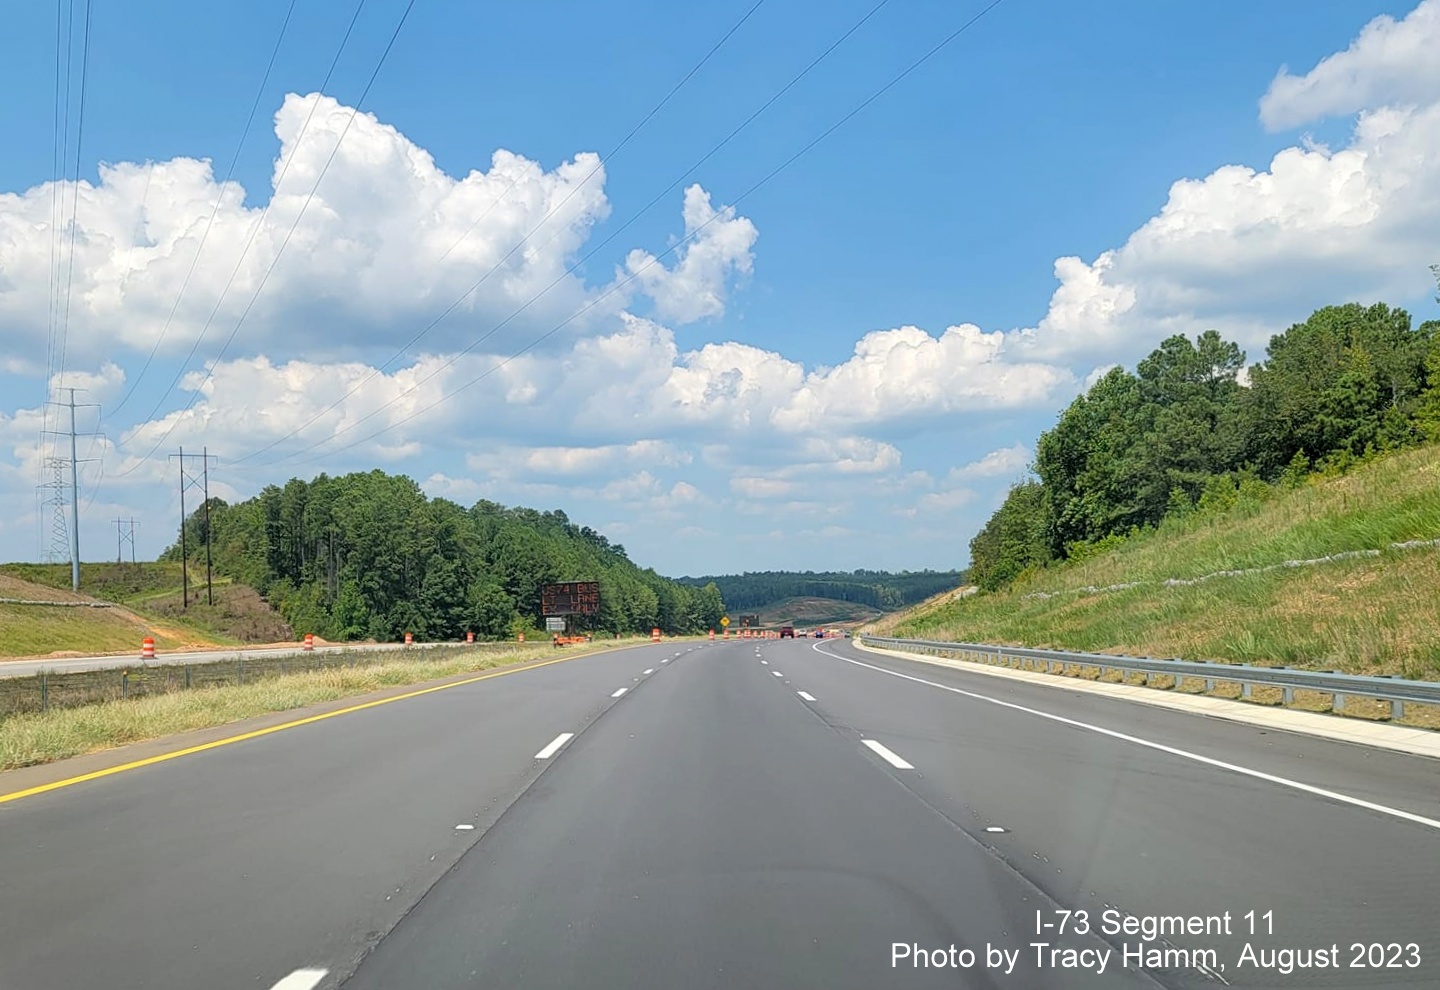 Image of completed 3-lane US 74 West roadway updated to interstate standards prior to future 
        I-73/I-74 Rockingham Bypass interchange, by Tracy Hamm, August 2023